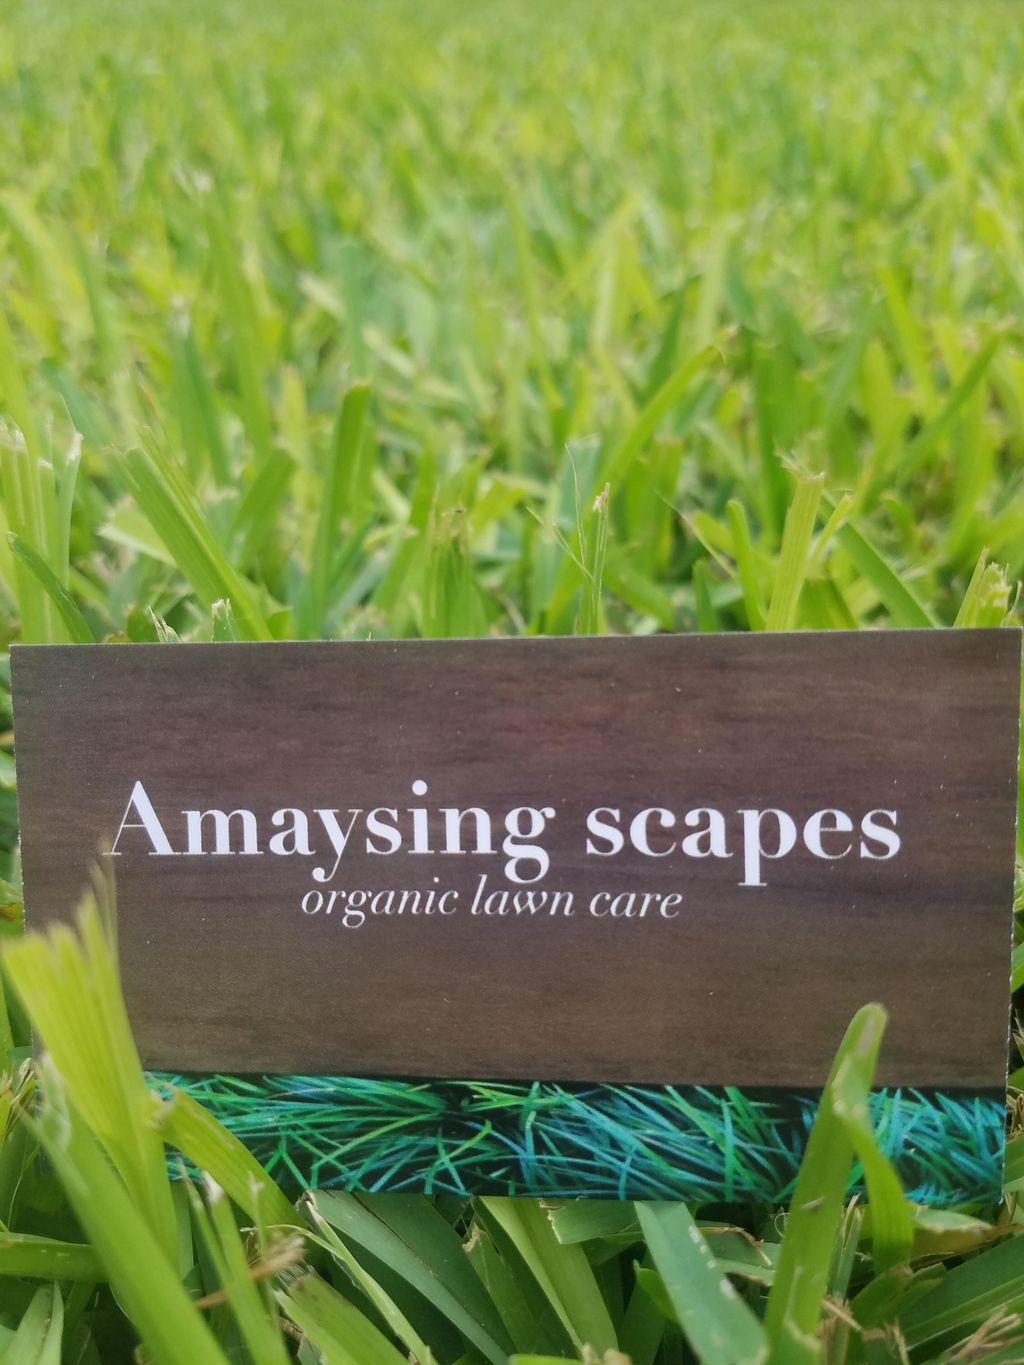 Amaysing scapes organic lawn care